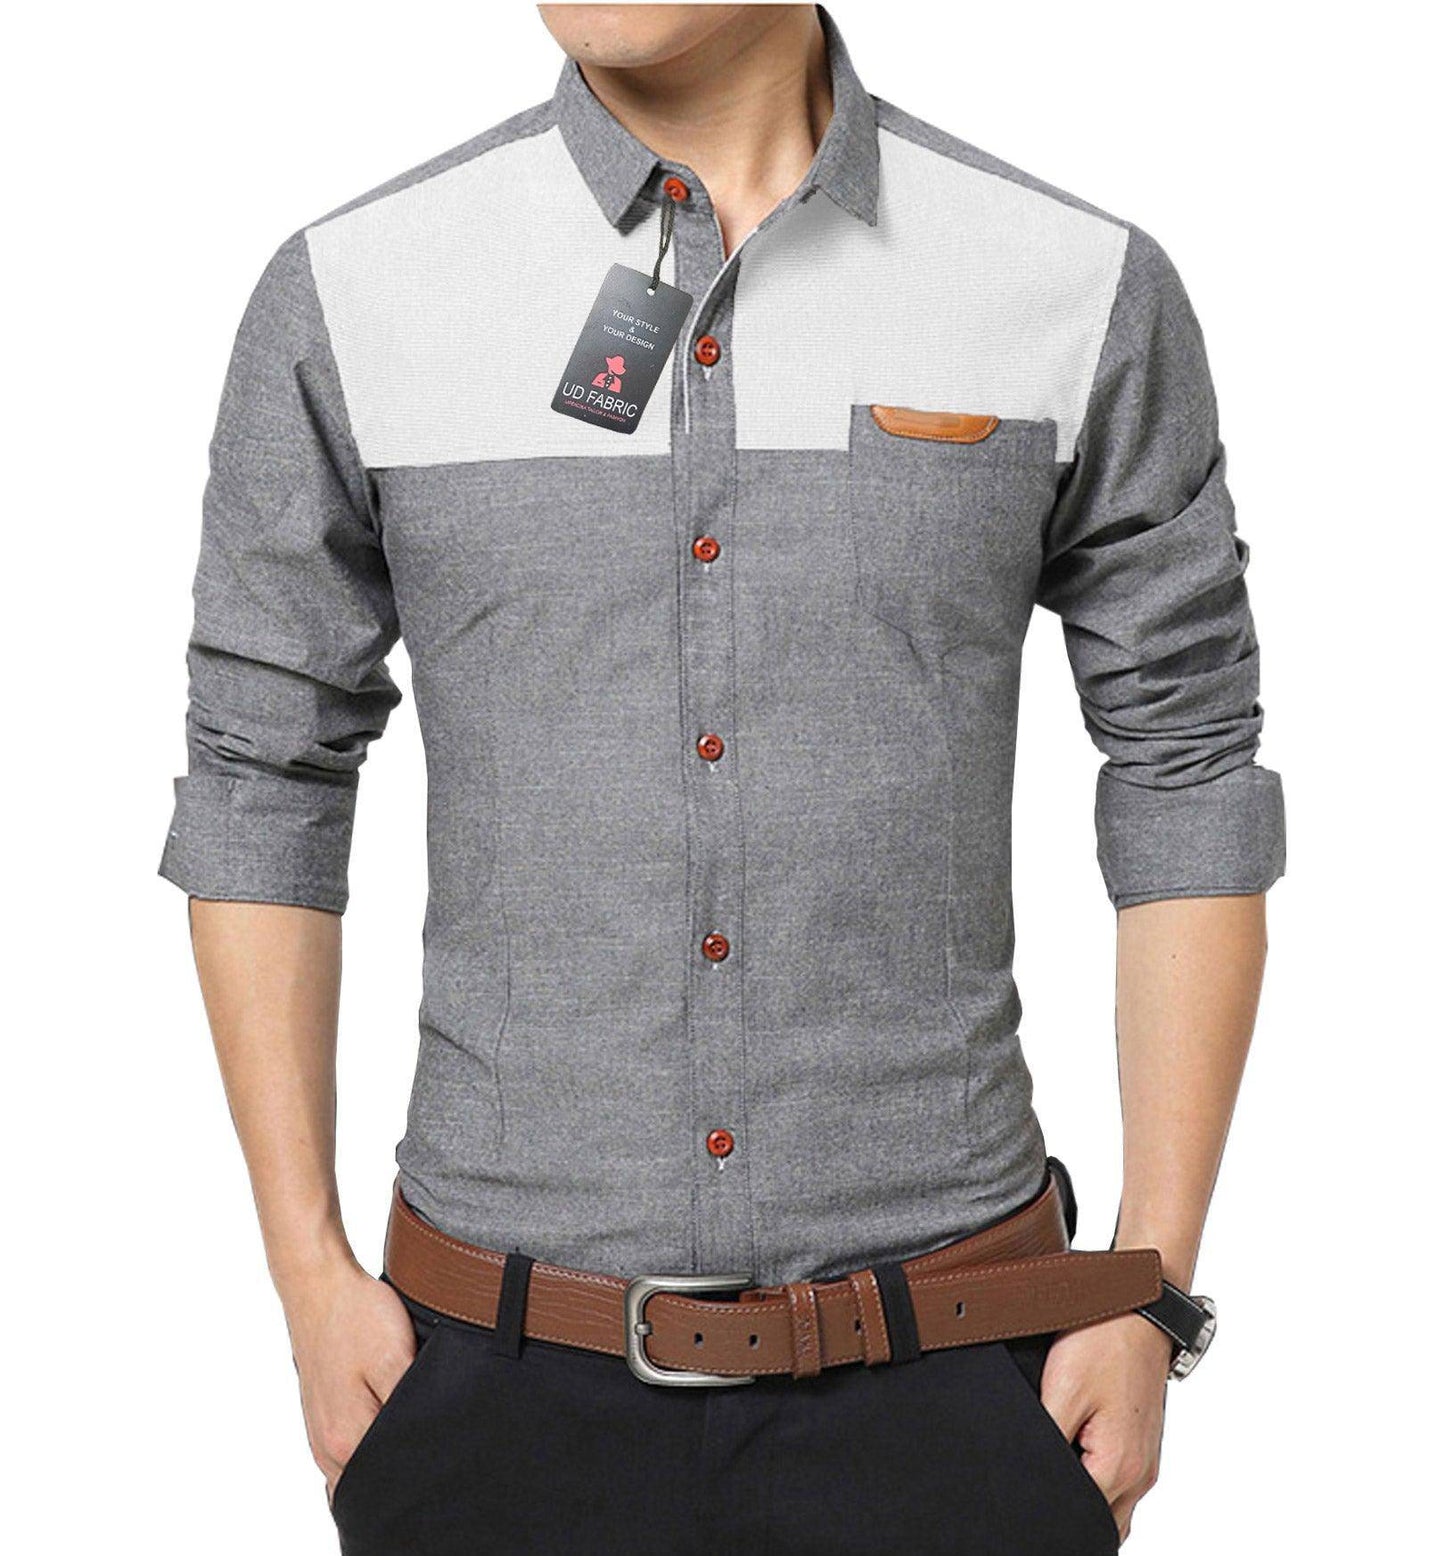 UD FABRIC Casual Slim Cotton Shirt for Men - White - UD FABRIC - Your Style our Design